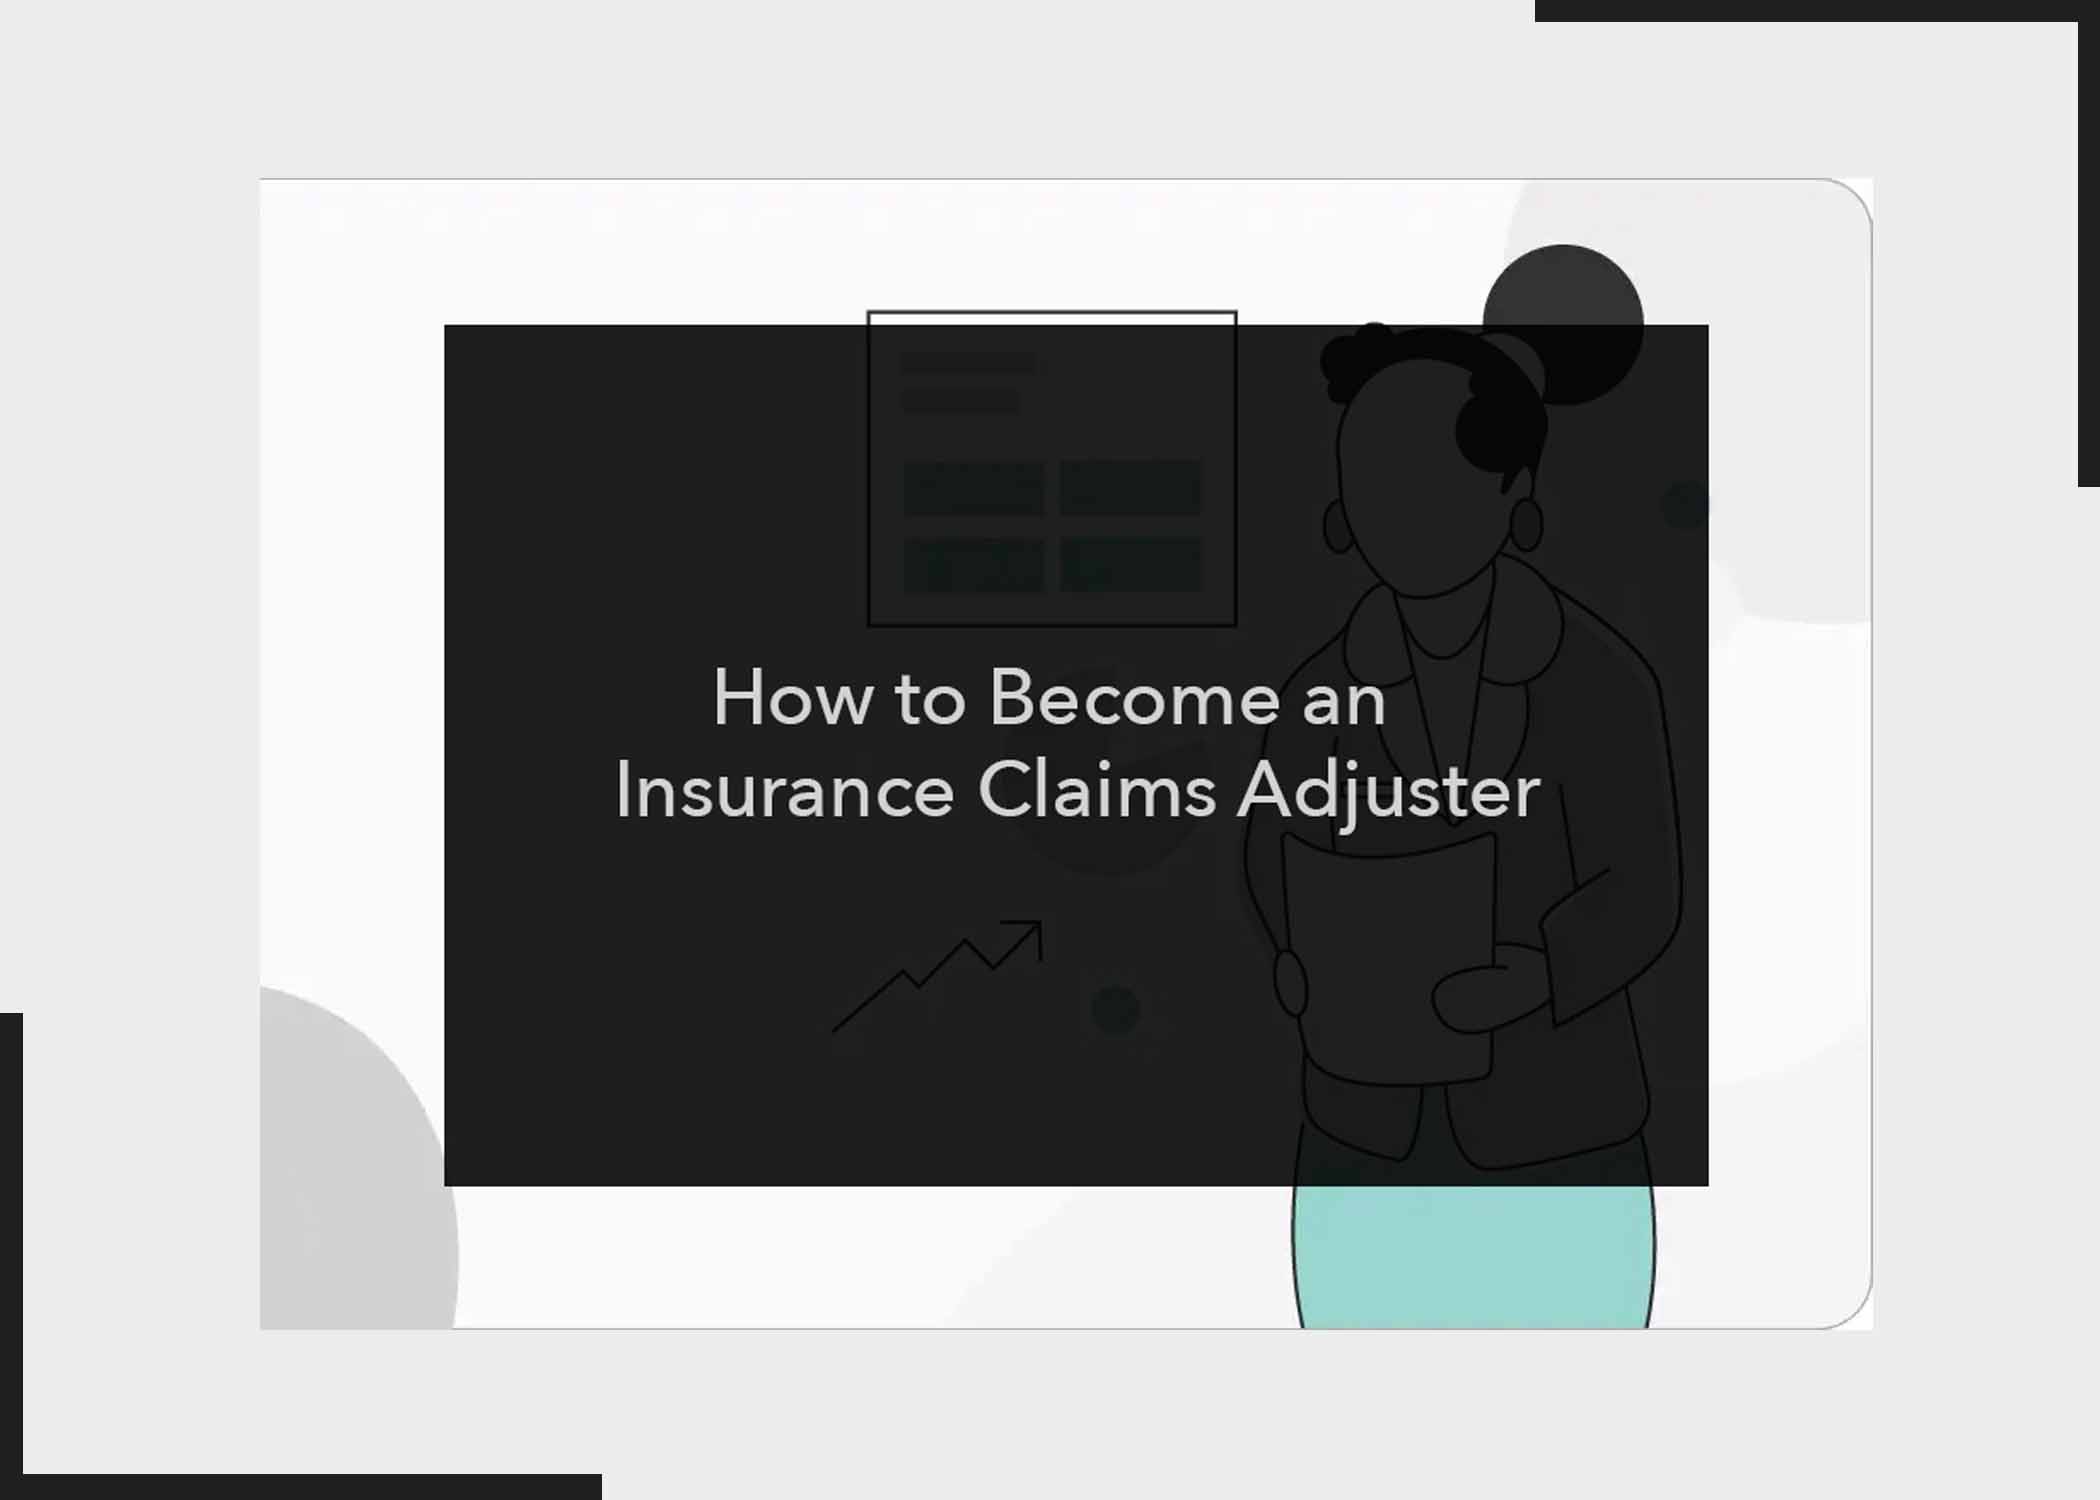 How to Become an Insurance Claims Adjuster